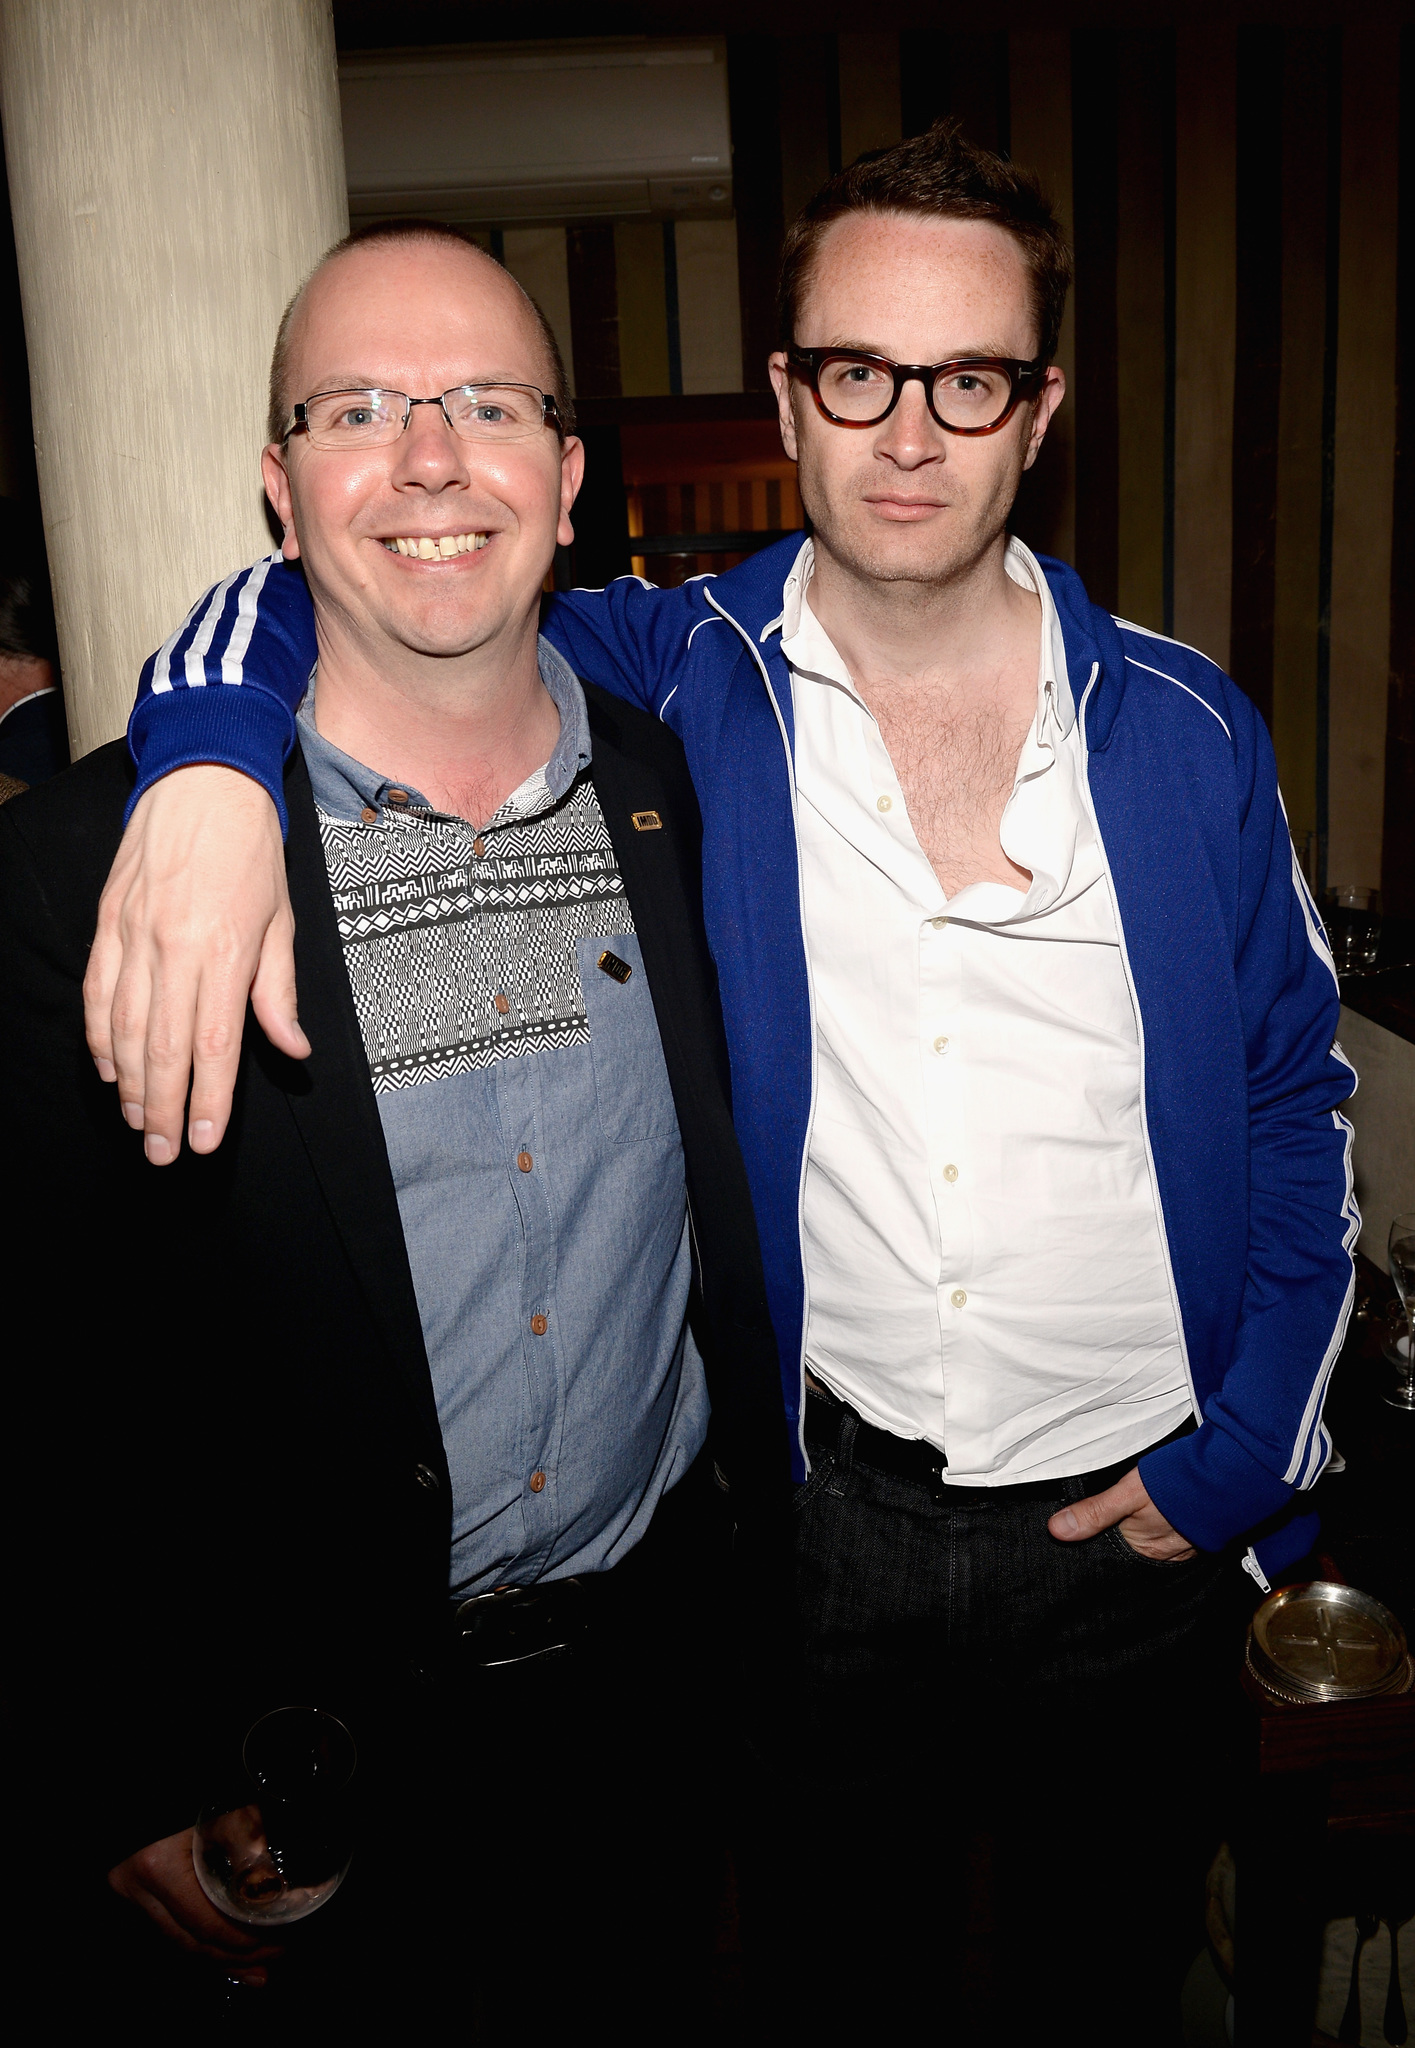 IMDb founder Col Needham and director Nicolas Winding Refn attend the IMDB's 2013 Cannes Film Festival Dinner Party during the 66th Annual Cannes Film Festival at Restaurant Mantel on May 20, 2013 in Cannes, France.